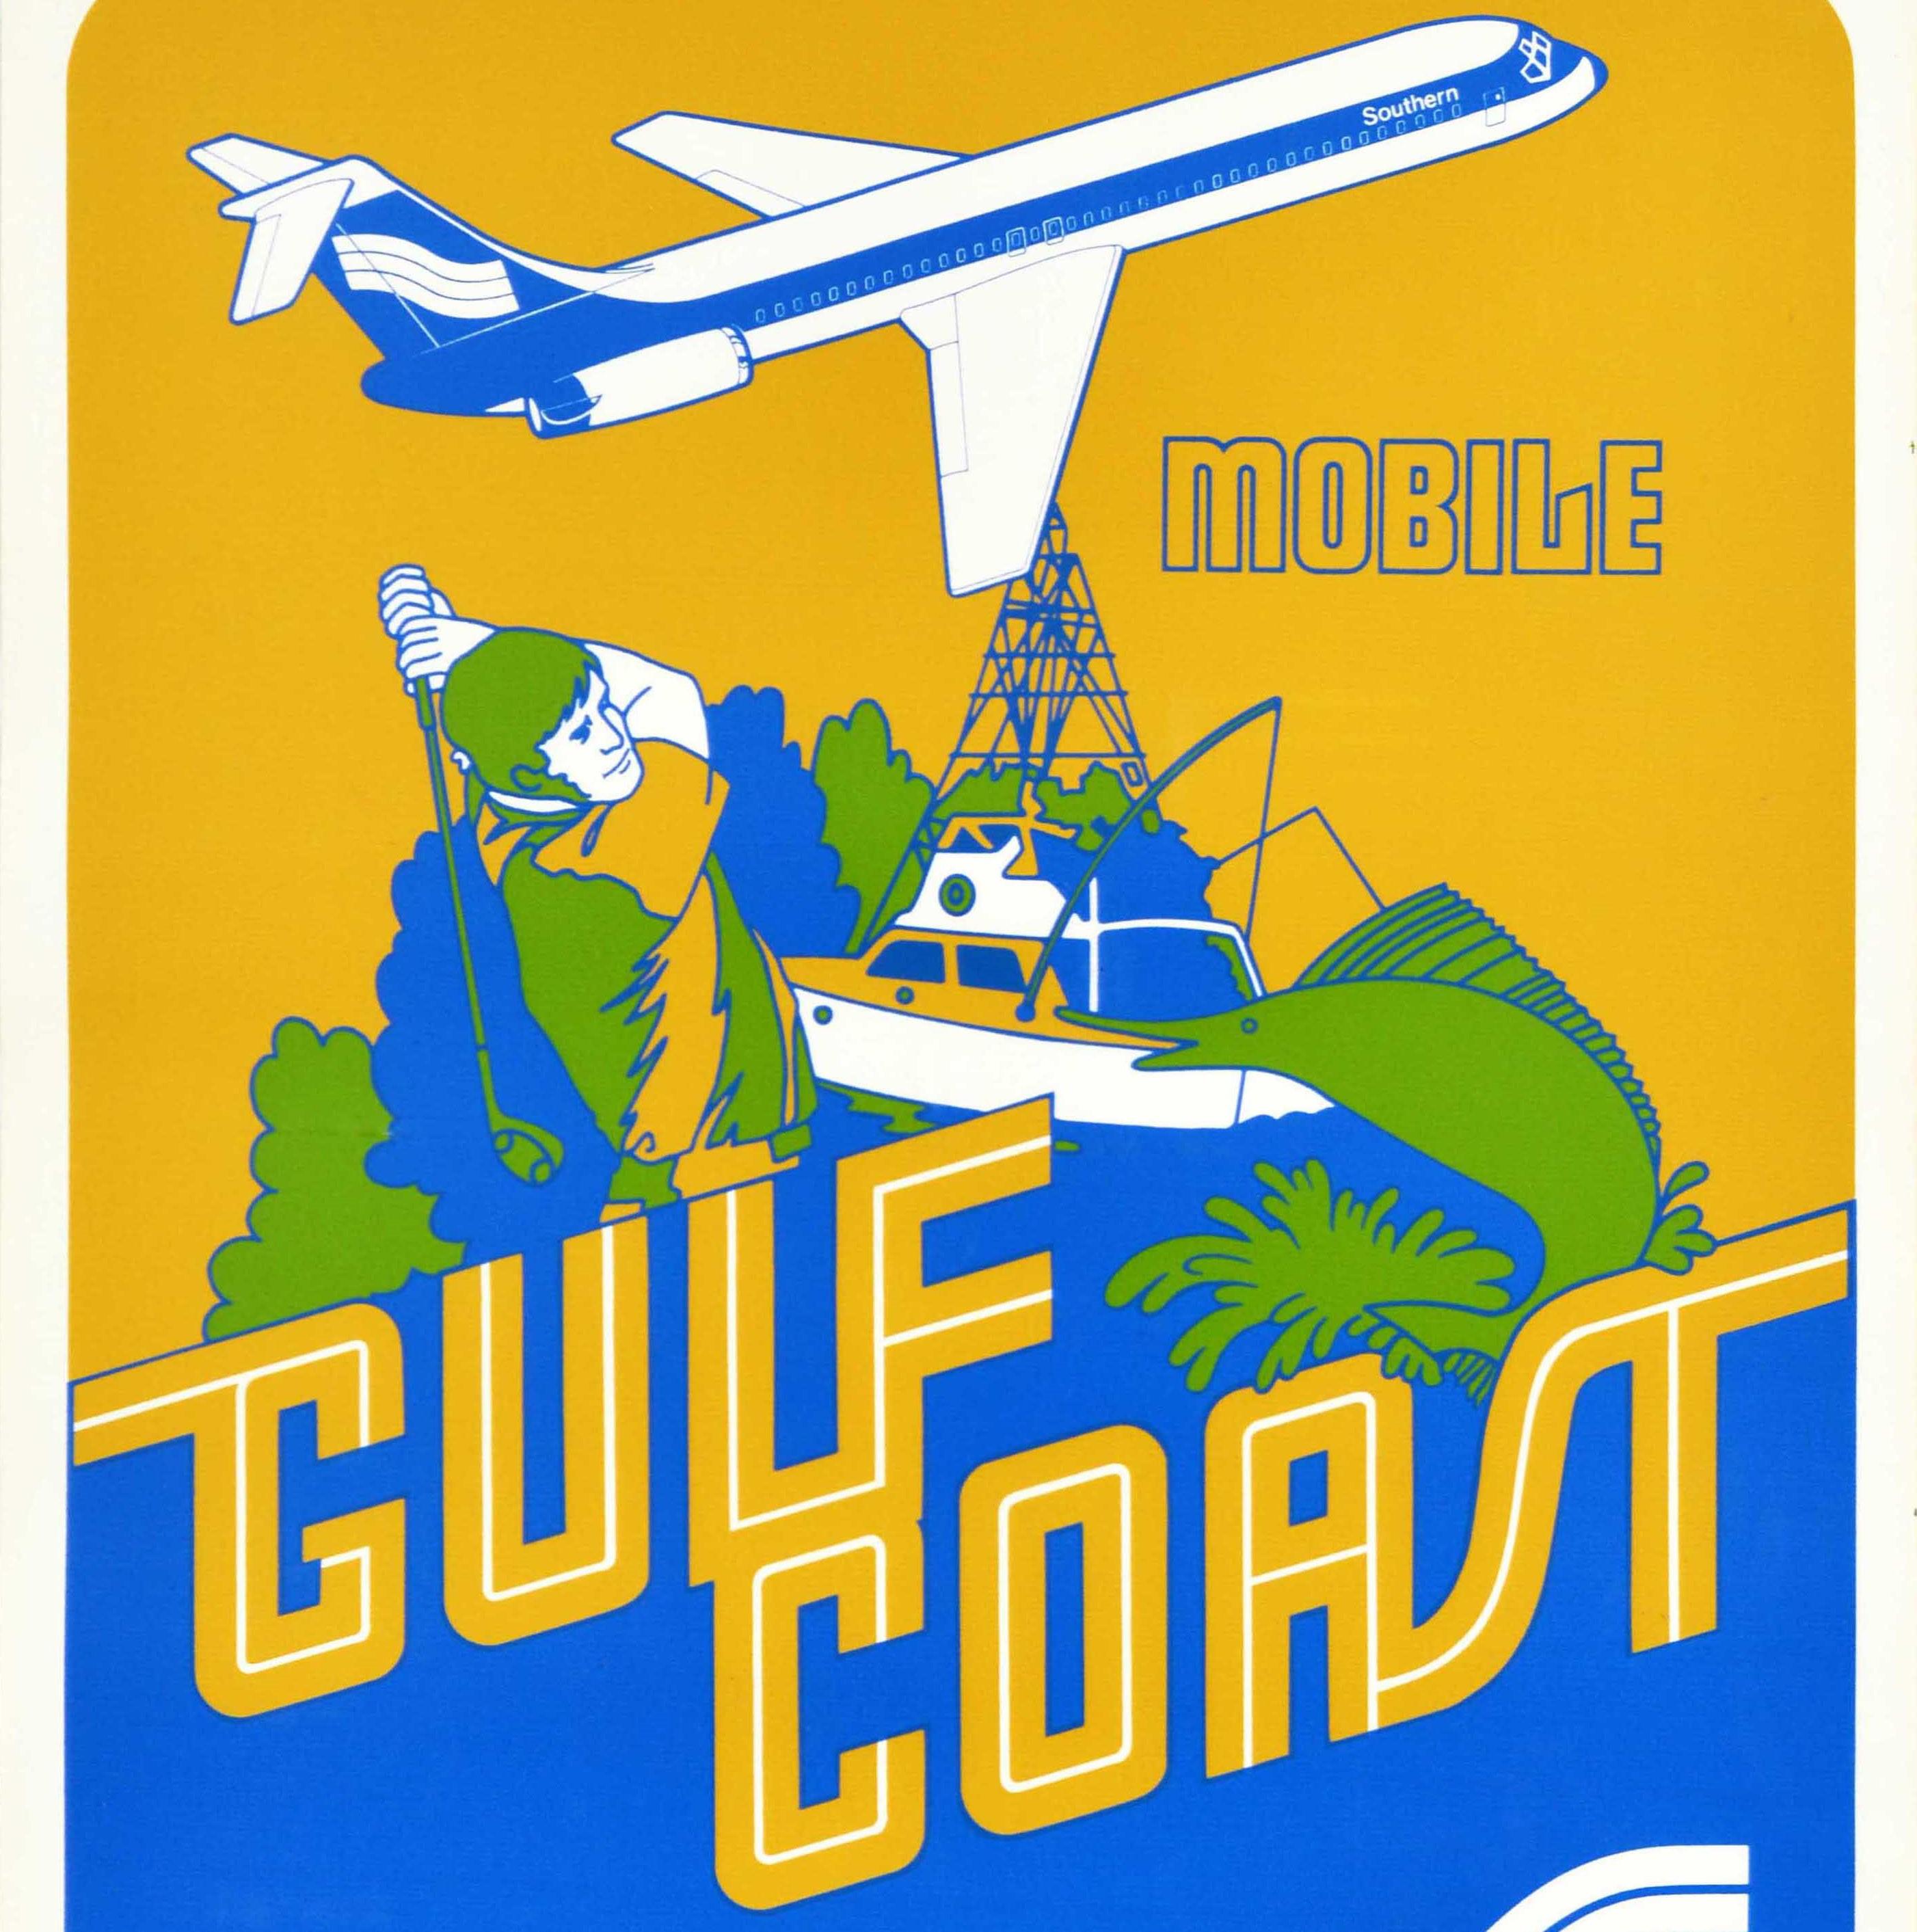 Original vintage travel poster for Mobile Gulf Coast Southern Airways (1944-1979) featuring a colourful diagonal design depicting a man playing golf in front of trees with a fish and boat on the side, a Southern plane flying overhead and the title